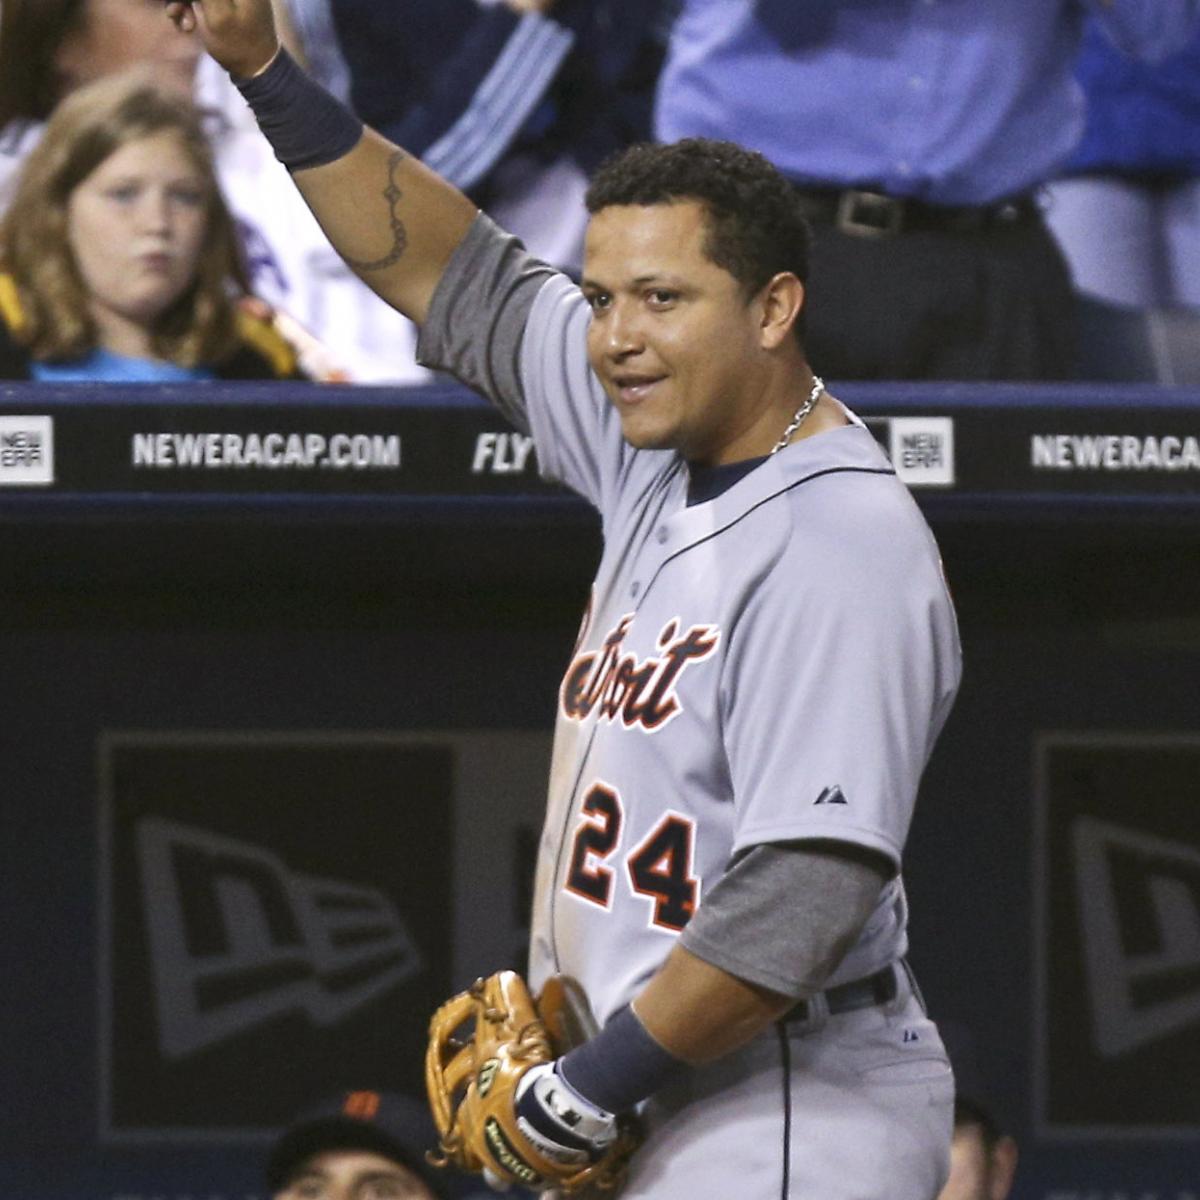 Watch: Miguel Cabrera rewards young fan for ditching Mike Trout jersey